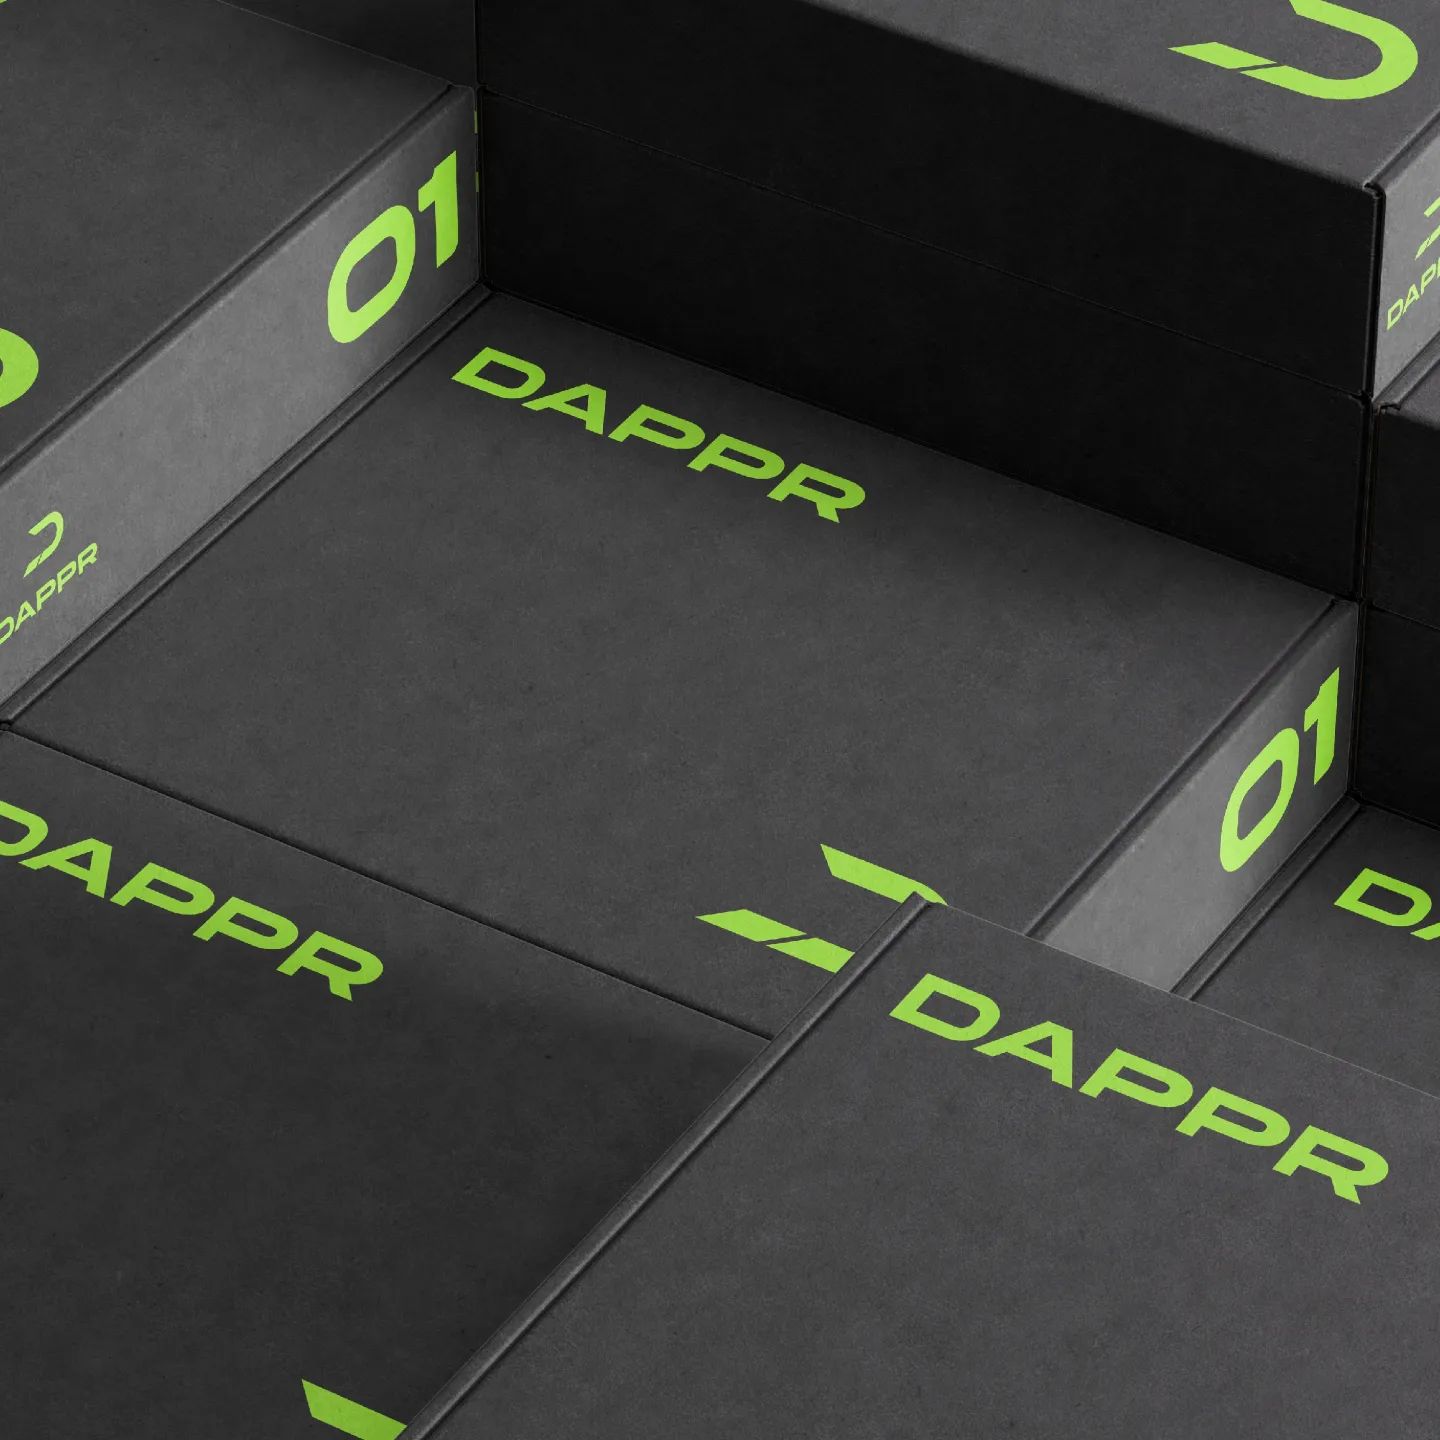 Dappr—Brand Identity

They offer versatile pieces designed to make a statement in any setting. Discover the epitome of r